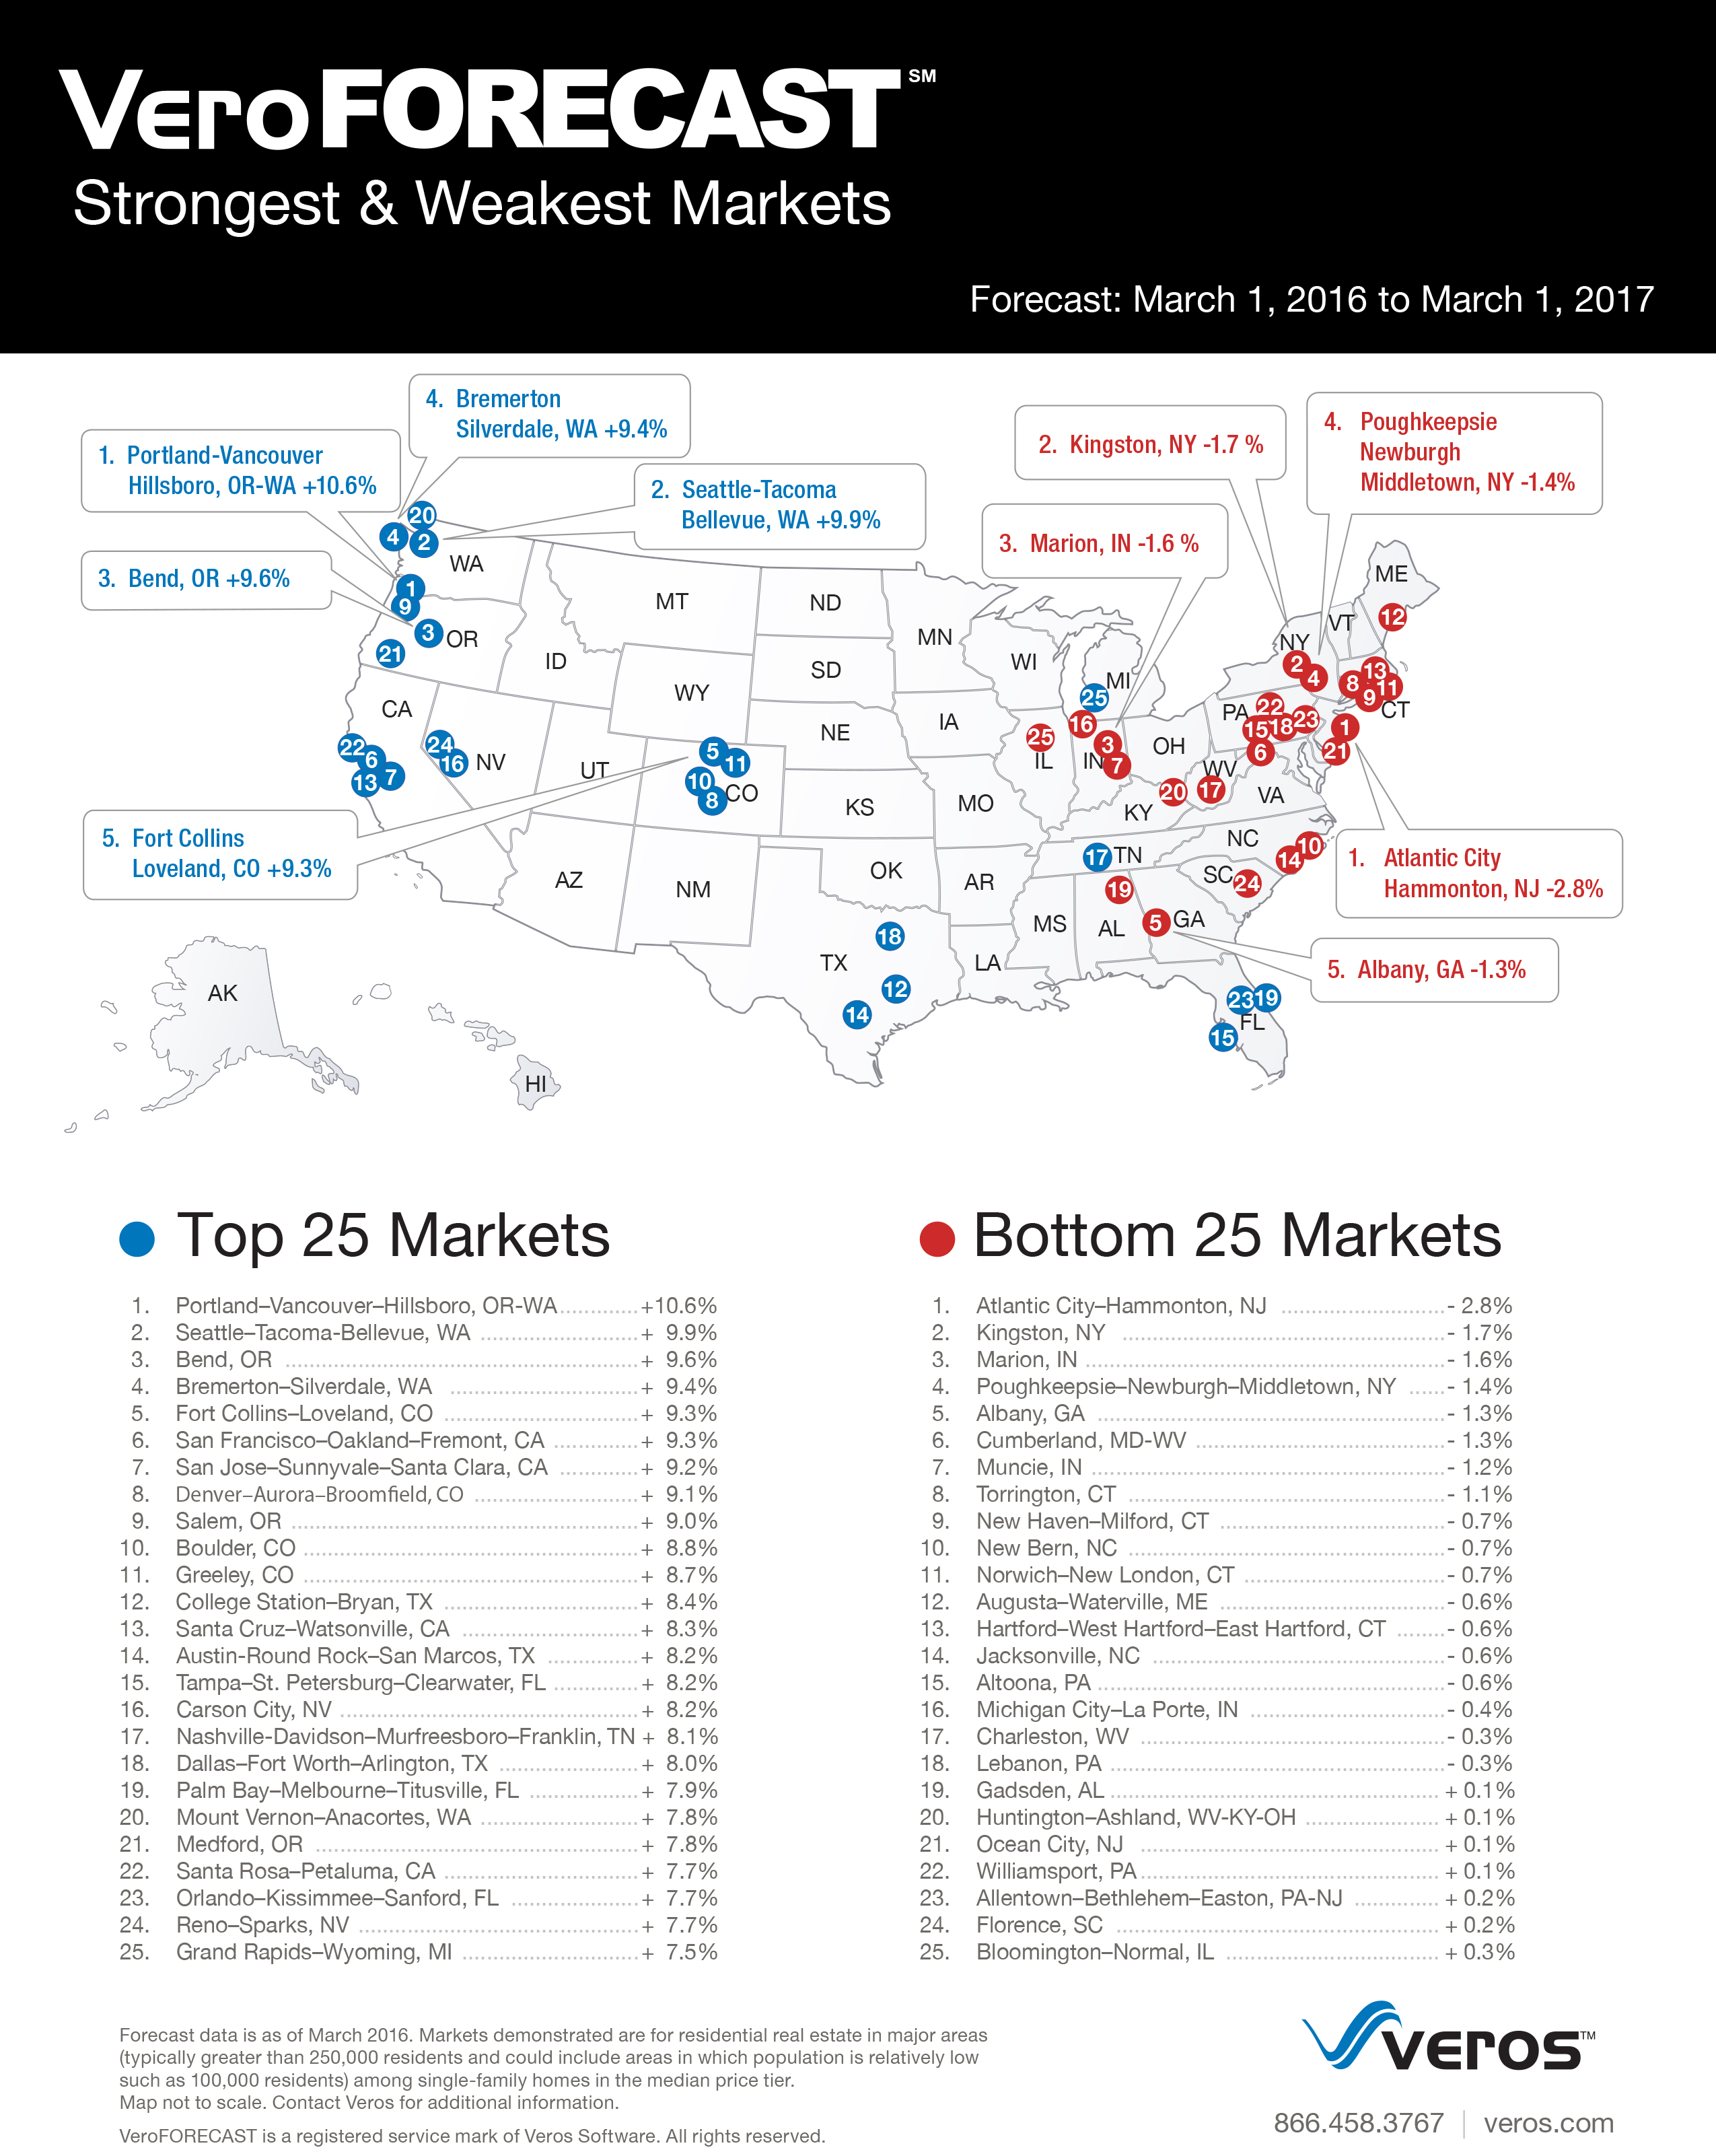 Veros Real Estate Market Forecast Projects Continued National Strength And Regional Concentration For Top 10 Market Positions Business Wire,How To Hide Fluorescent Lights